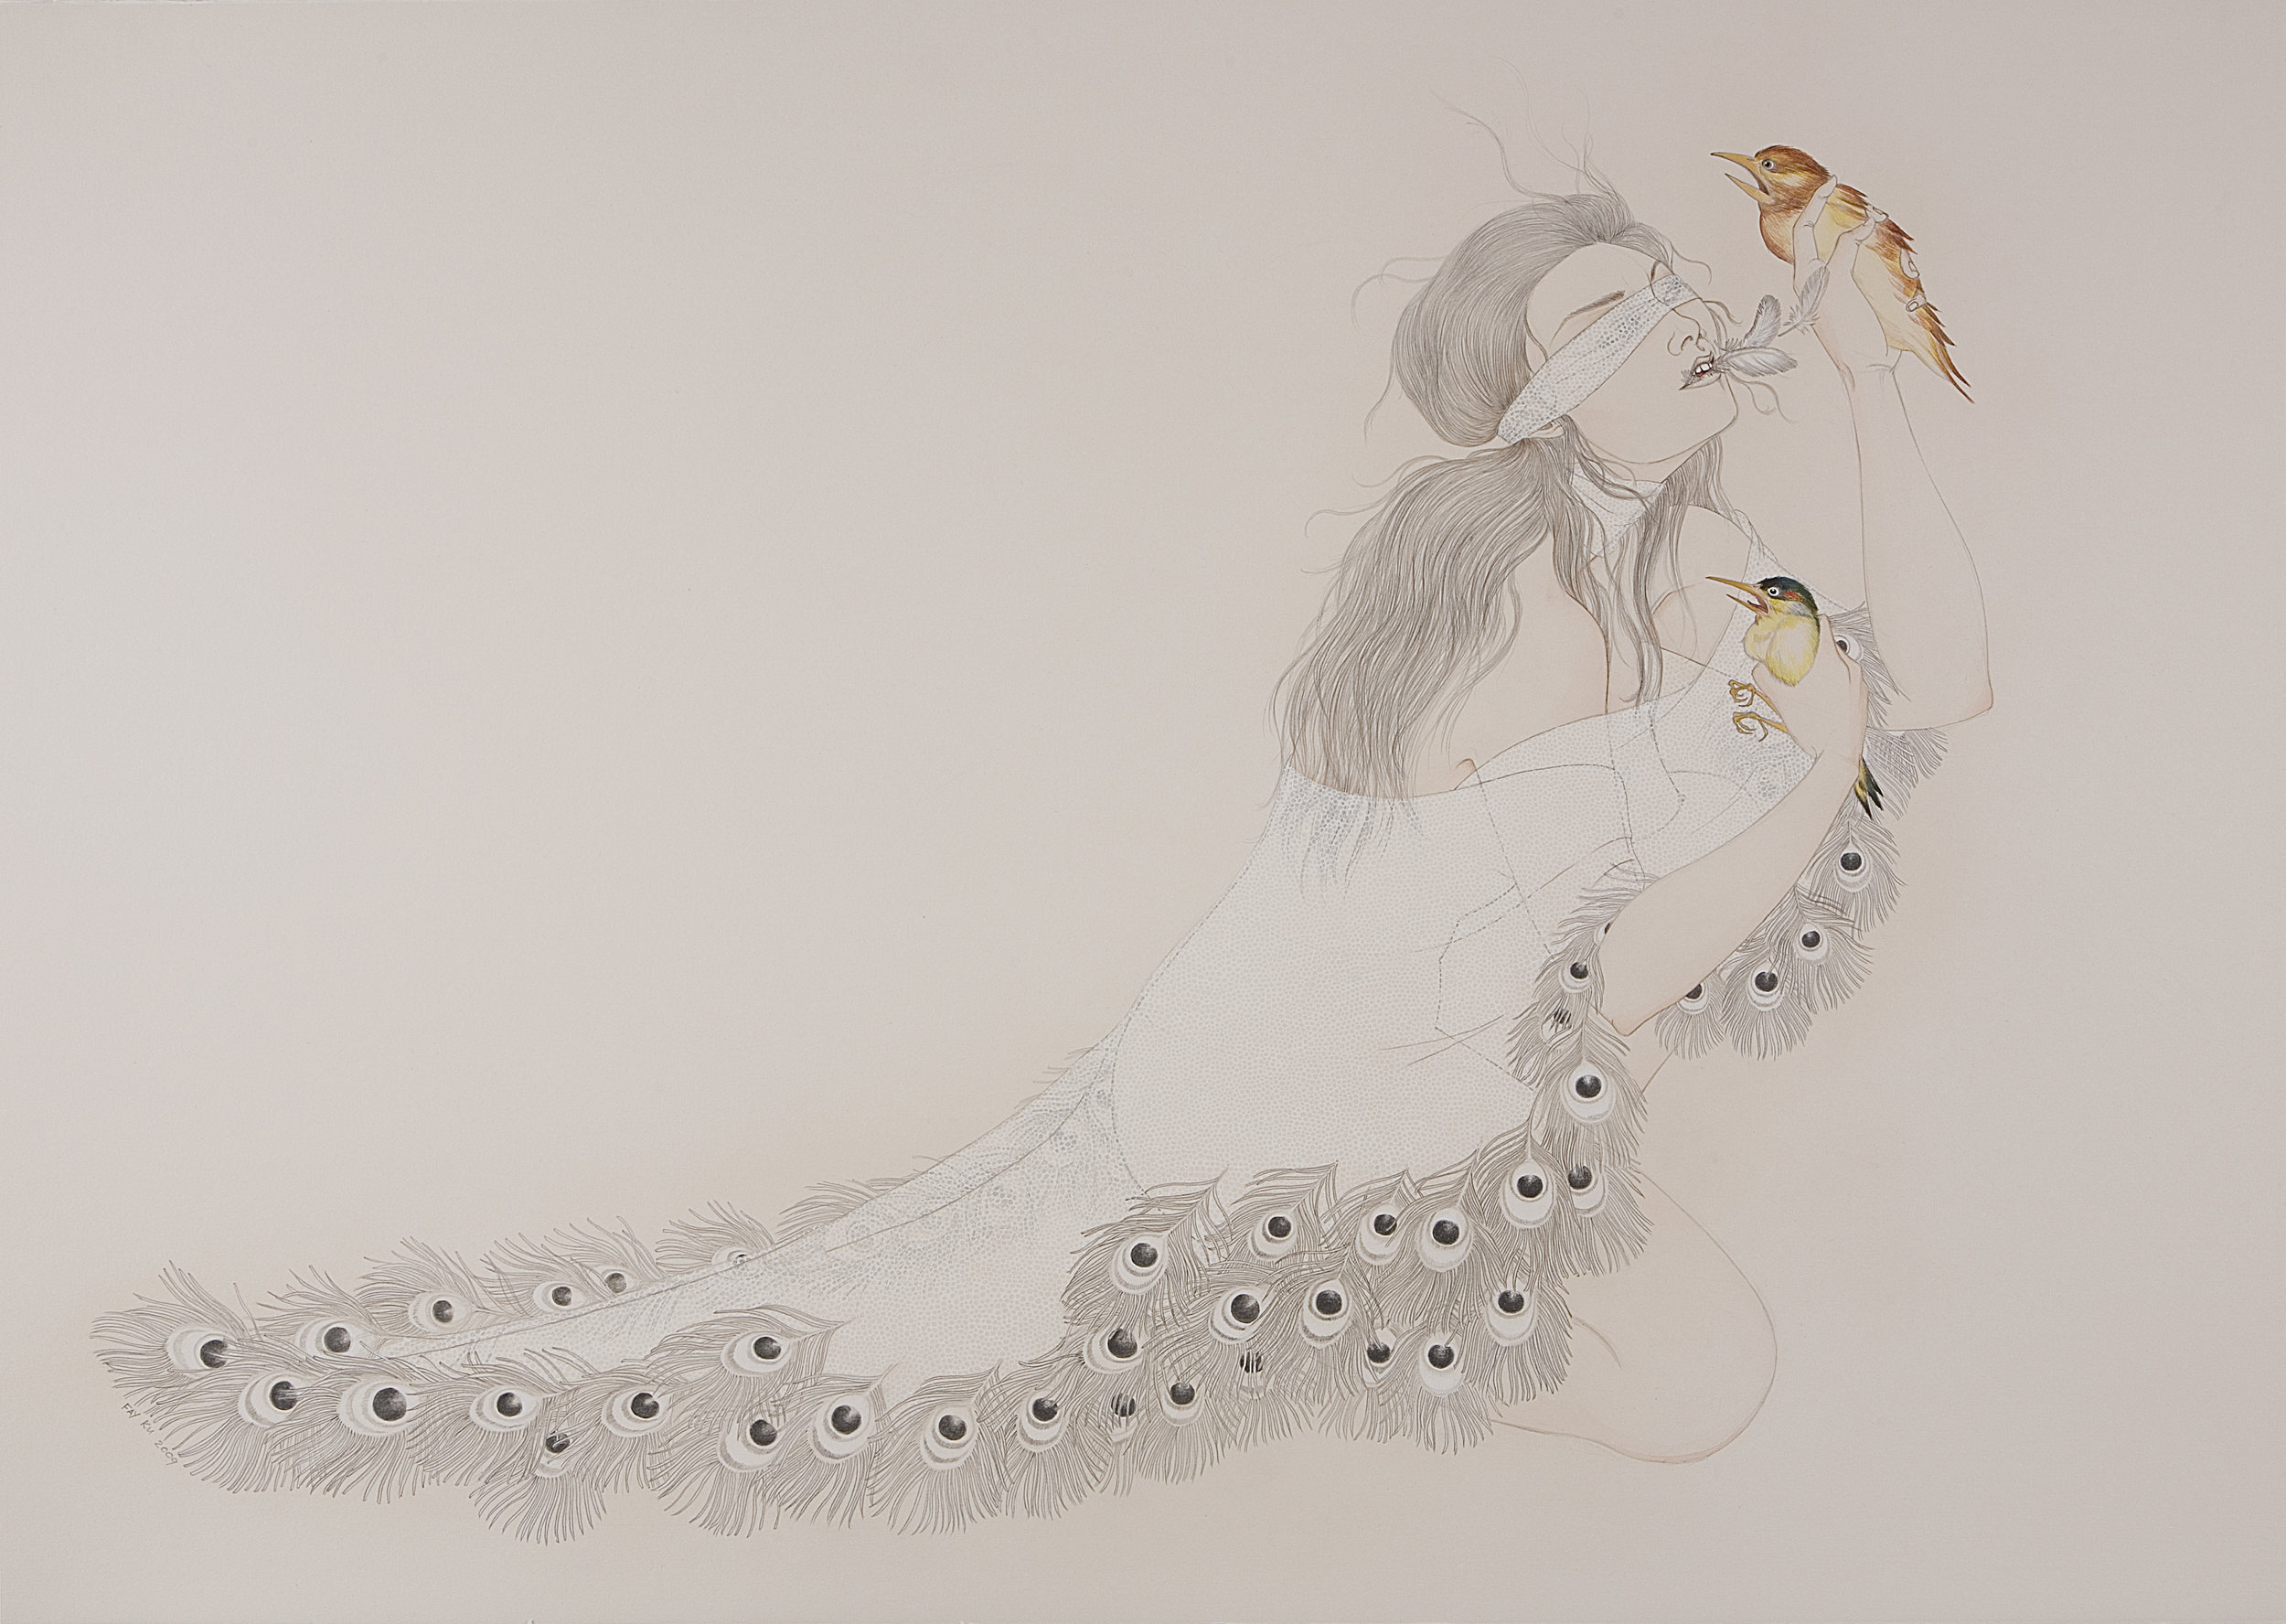   Birds Of A Feather , 2009 Graphite, ink, watercolor on ivory Fabriana Rosaspina 27.5 x 39 inches Private collection 